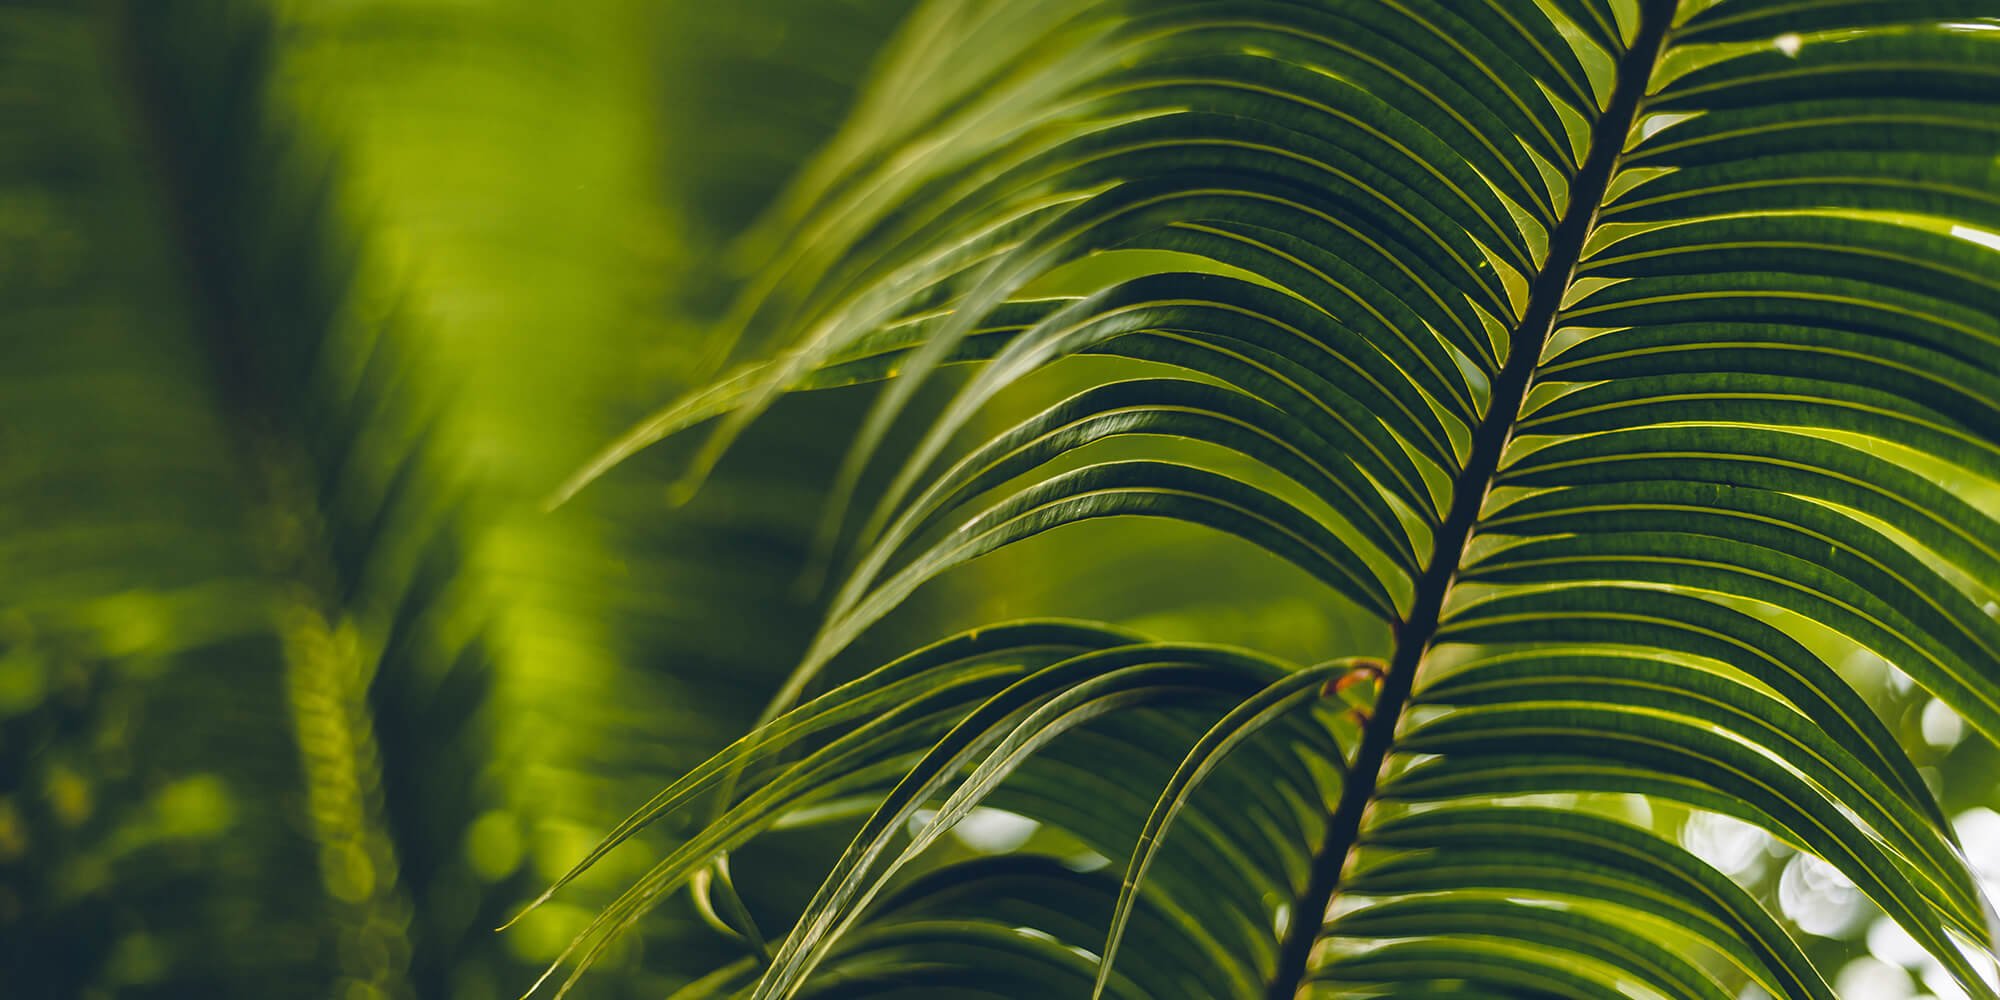 Lush green palm tree leaves in soft focus